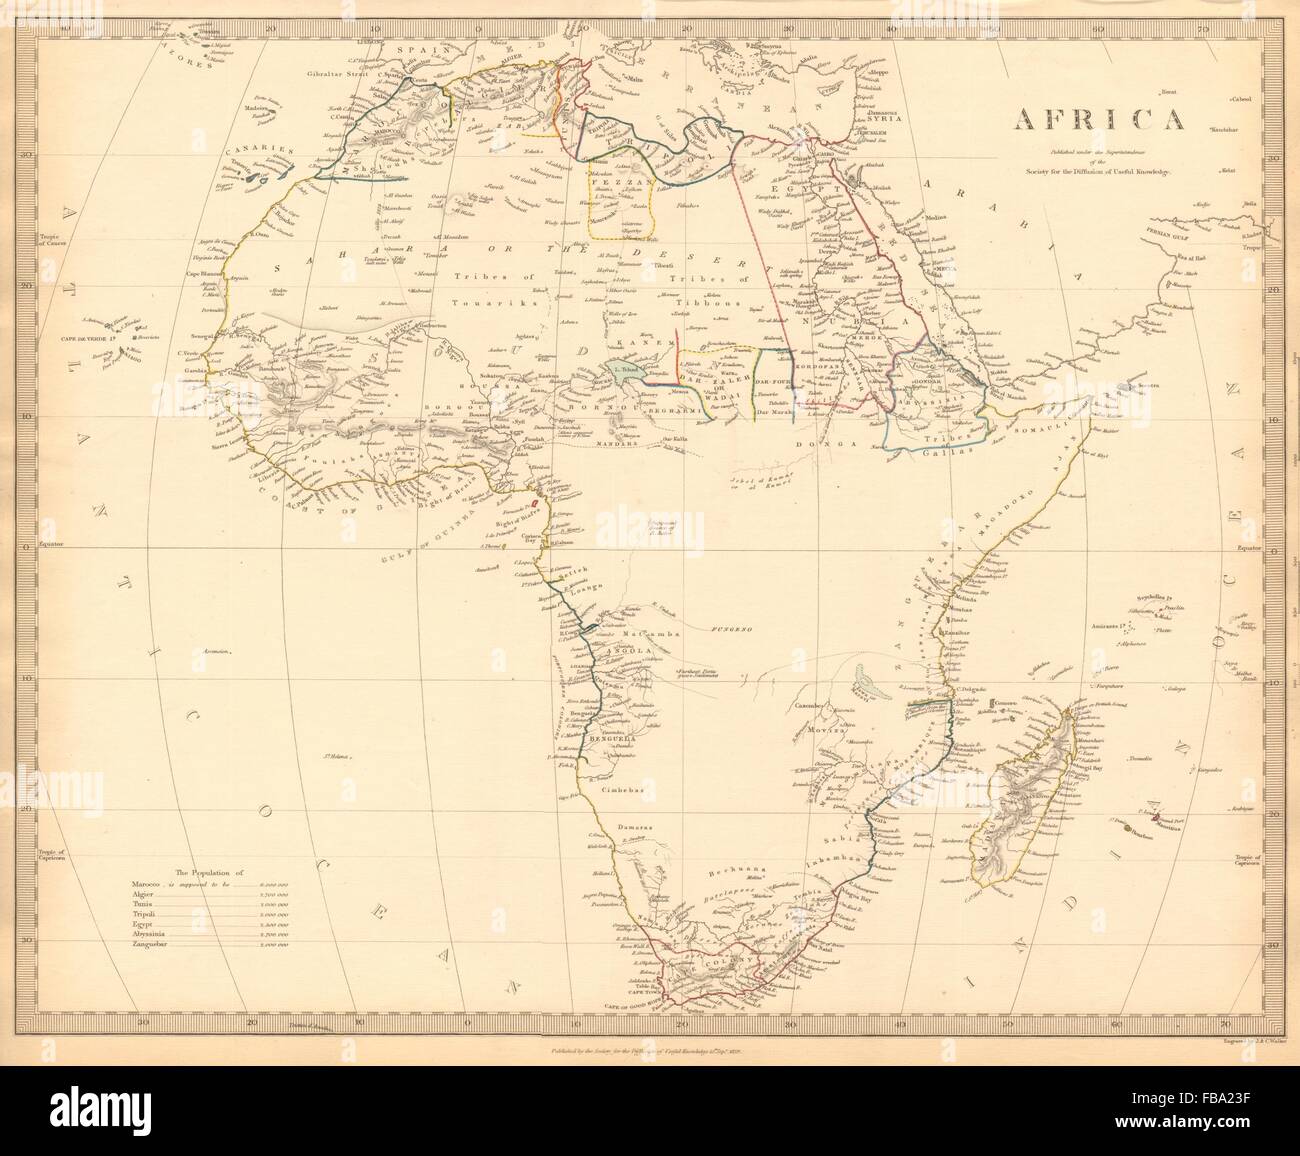 AFRICA map pre-dating much exploration. Mountains of Kong.Population.SDUK 1844 Stock Photo